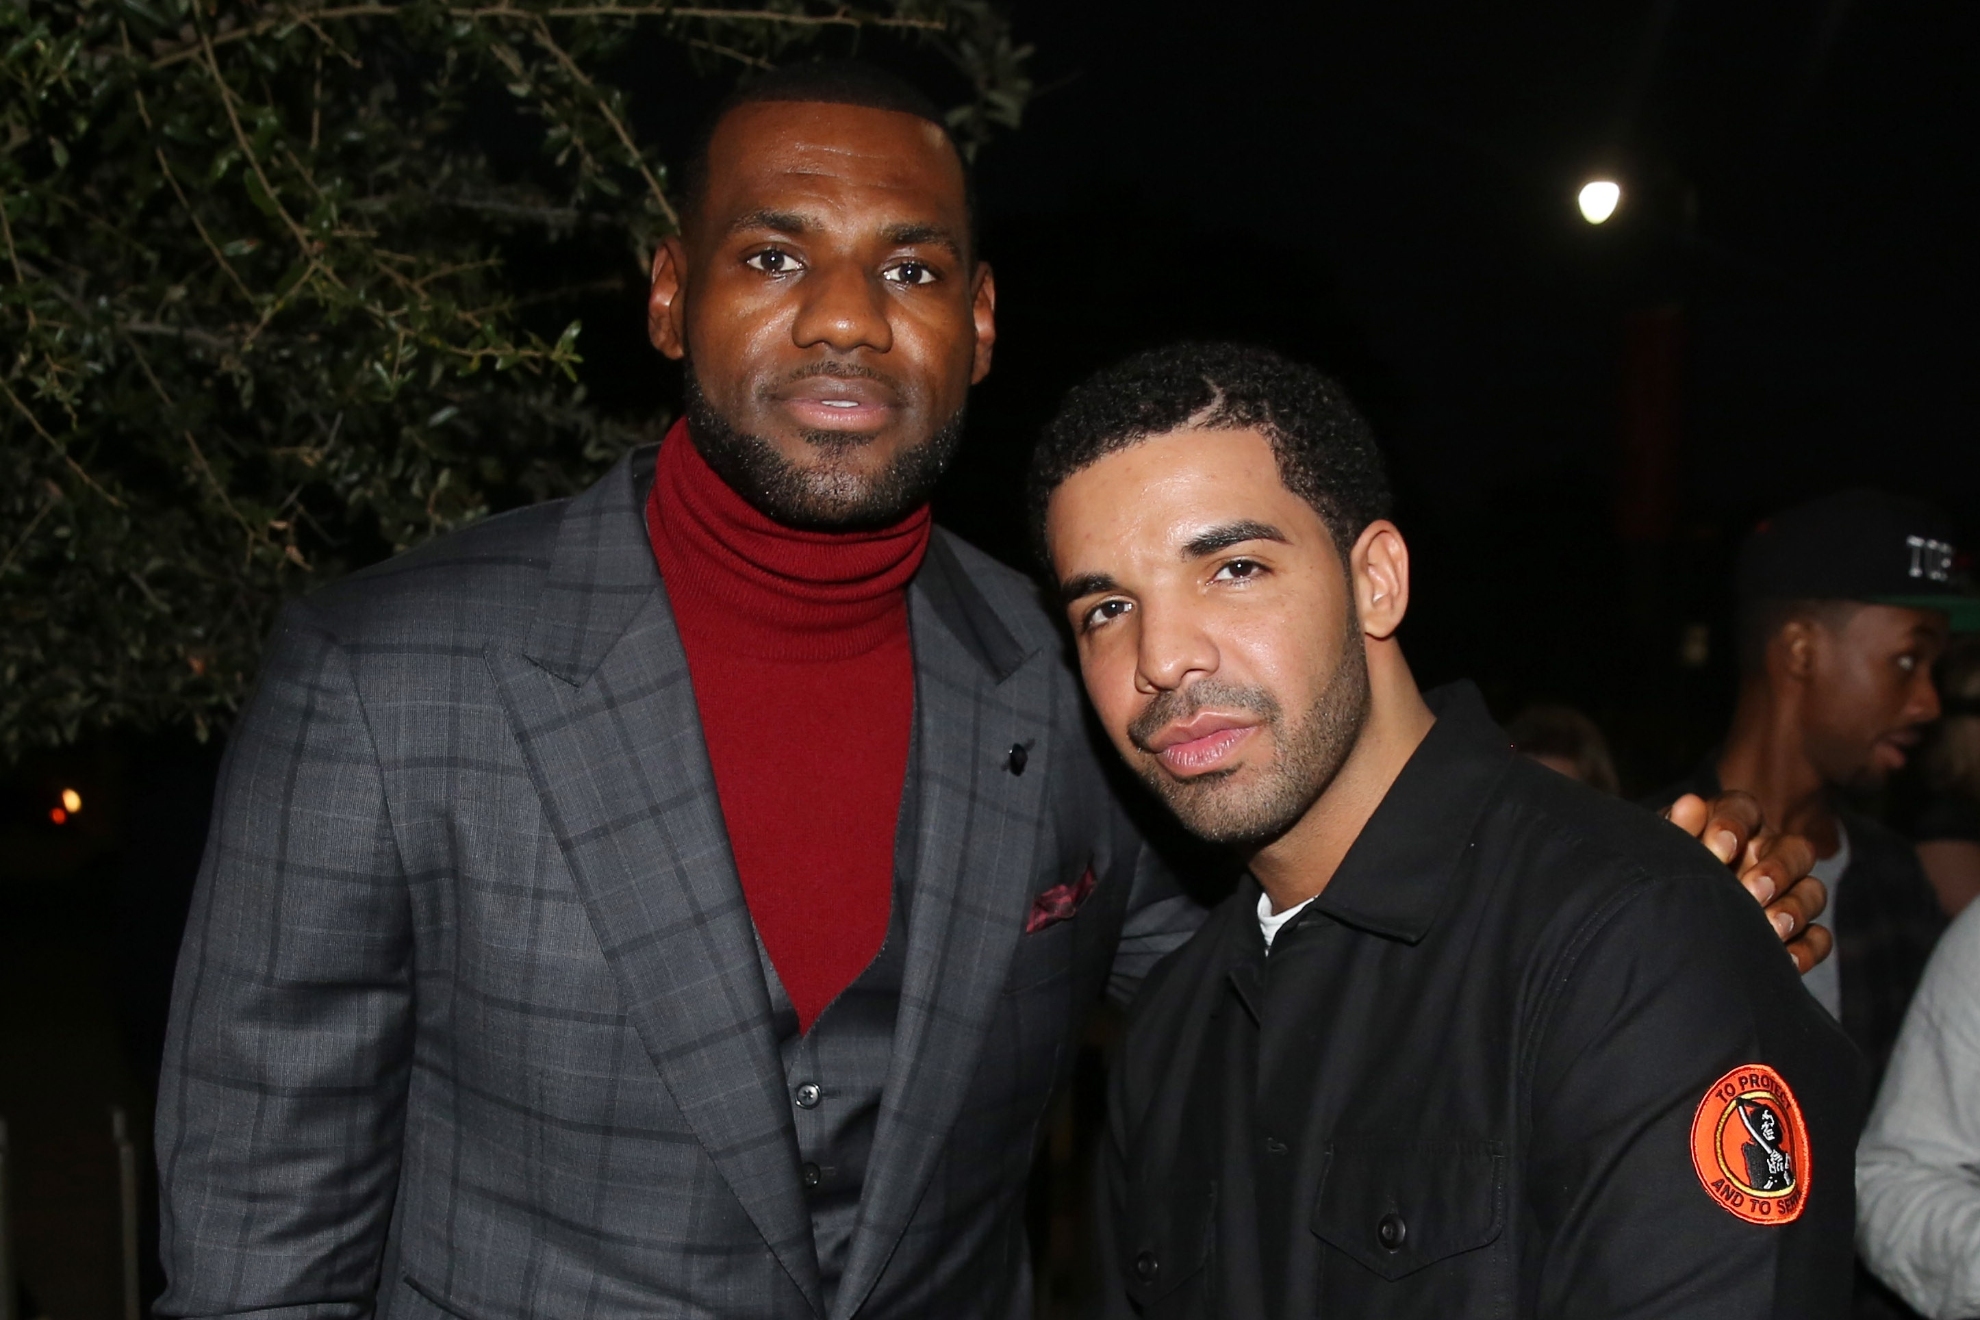 LeBron James and Drake at a public event